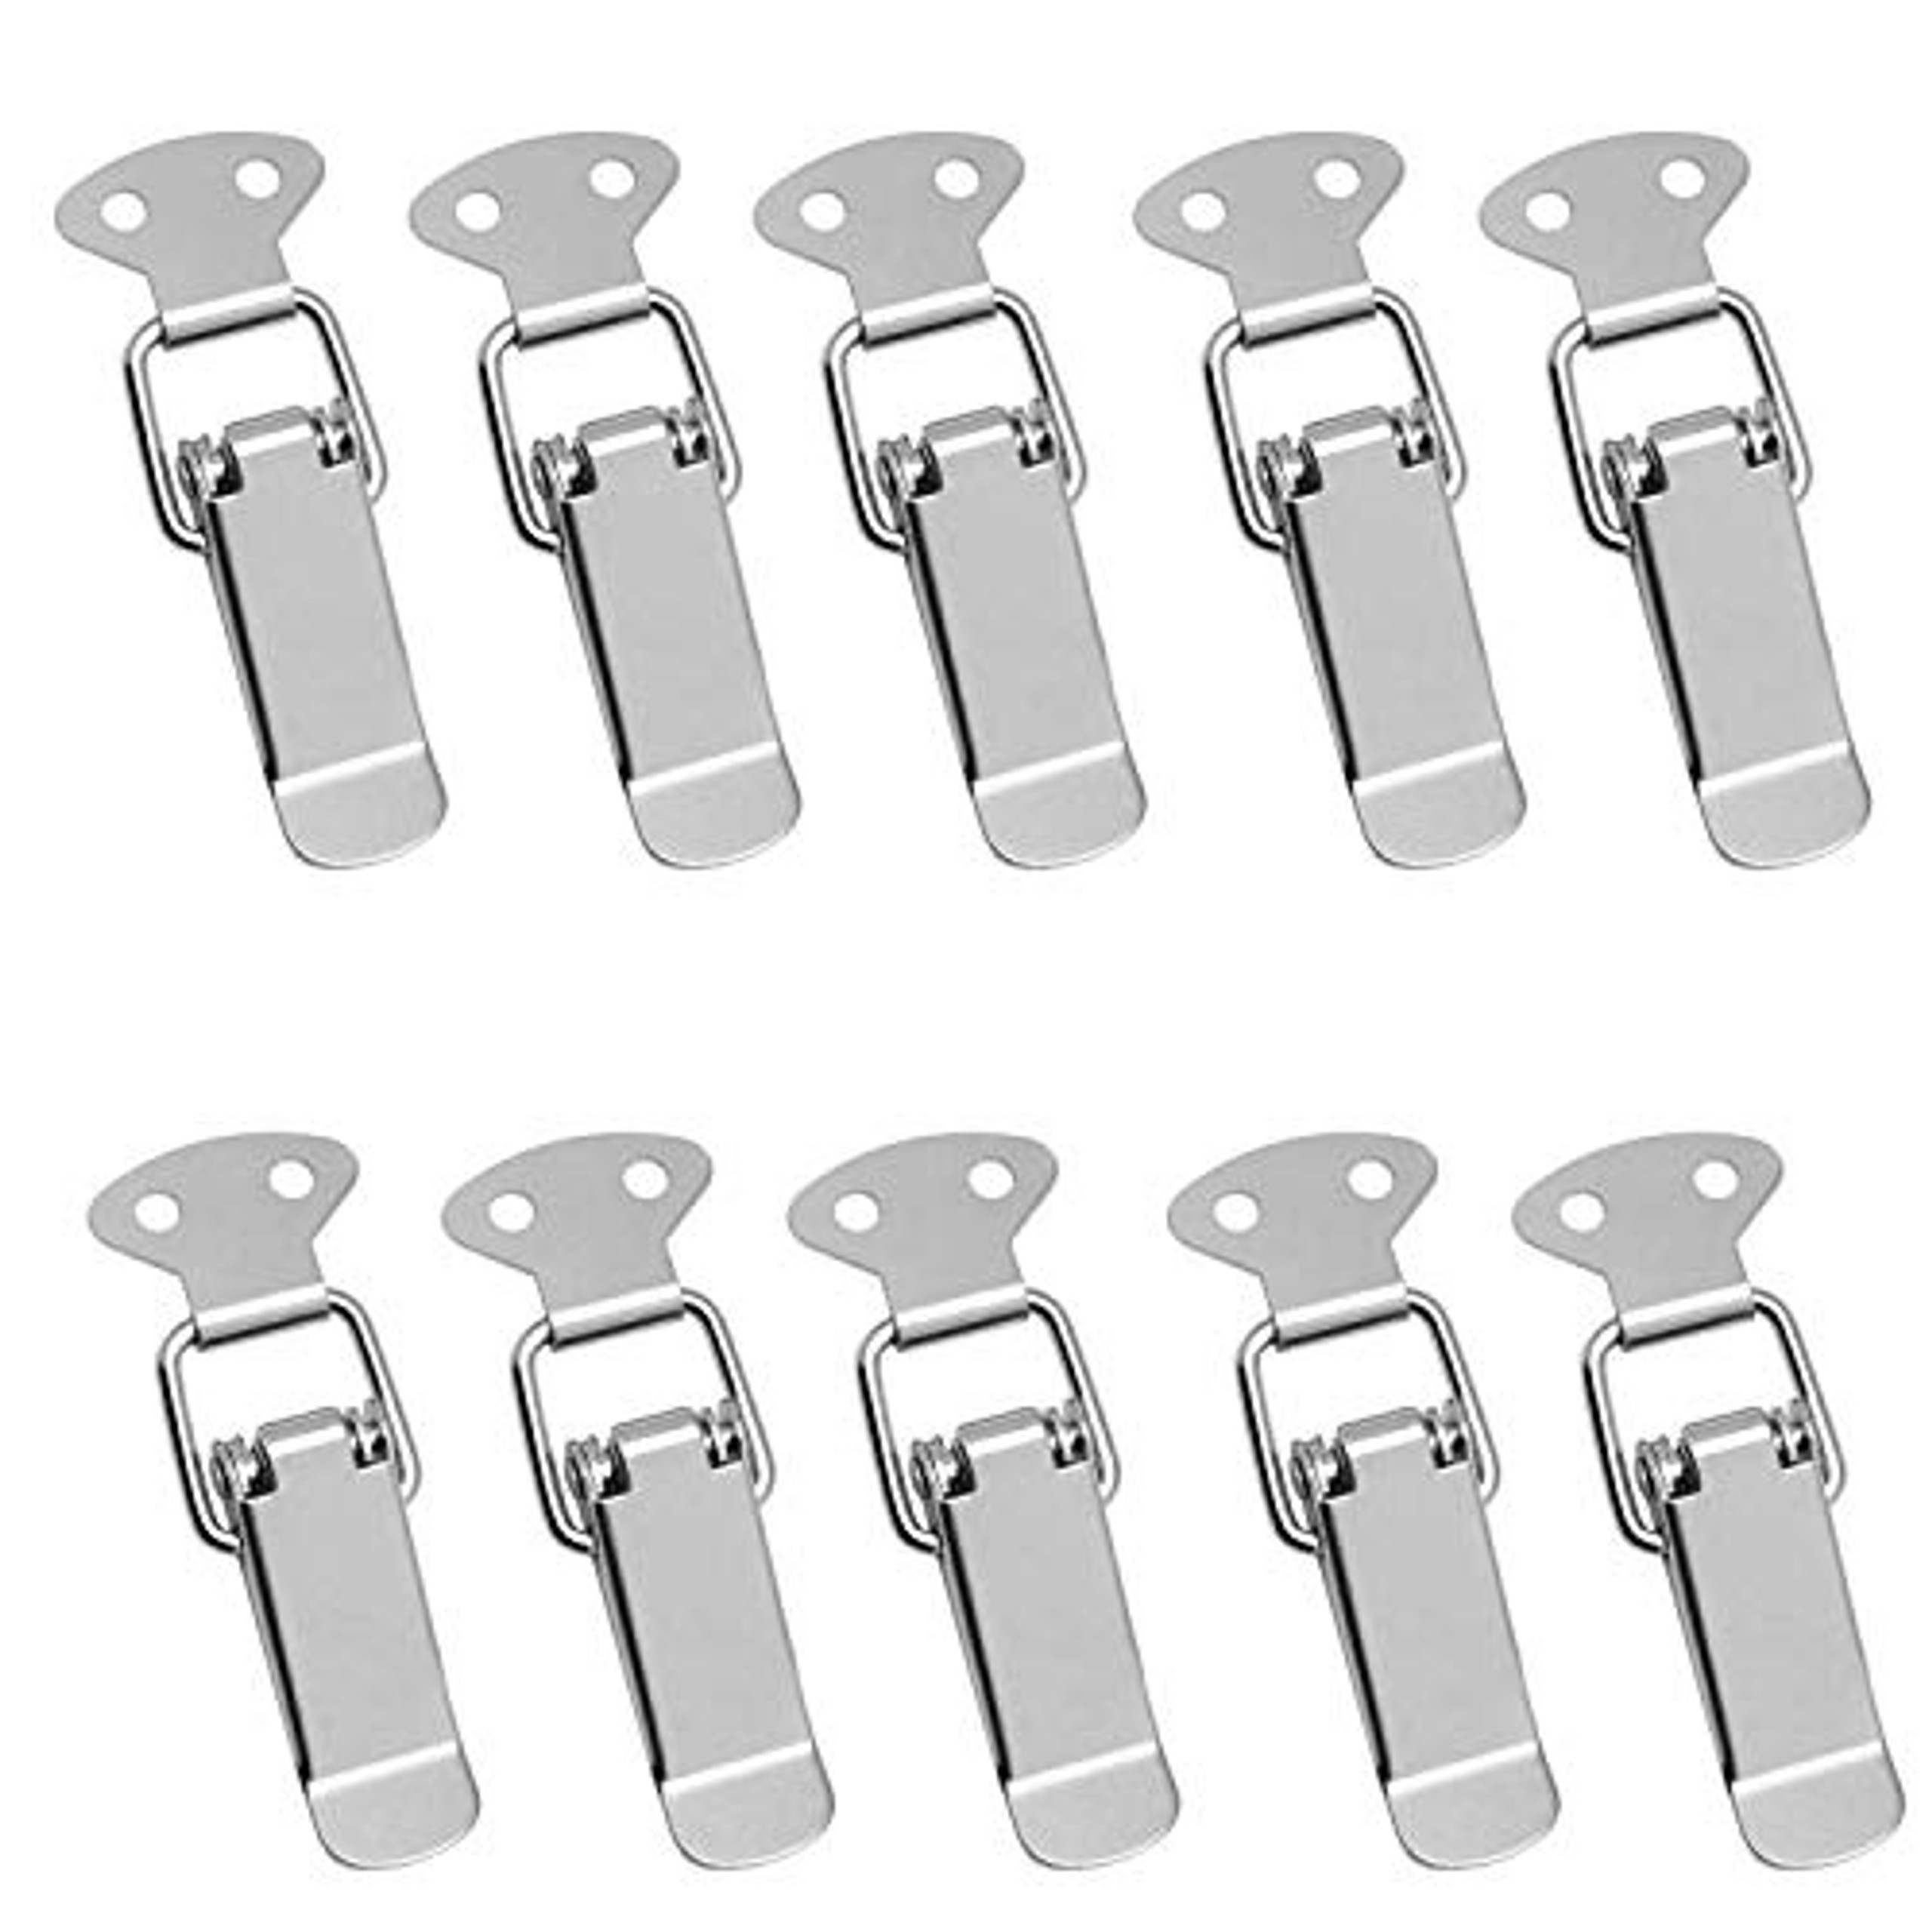 10 Pcs Duck Billed Buckles, Spring Loaded Catch Clamp Clips, Stainless ...